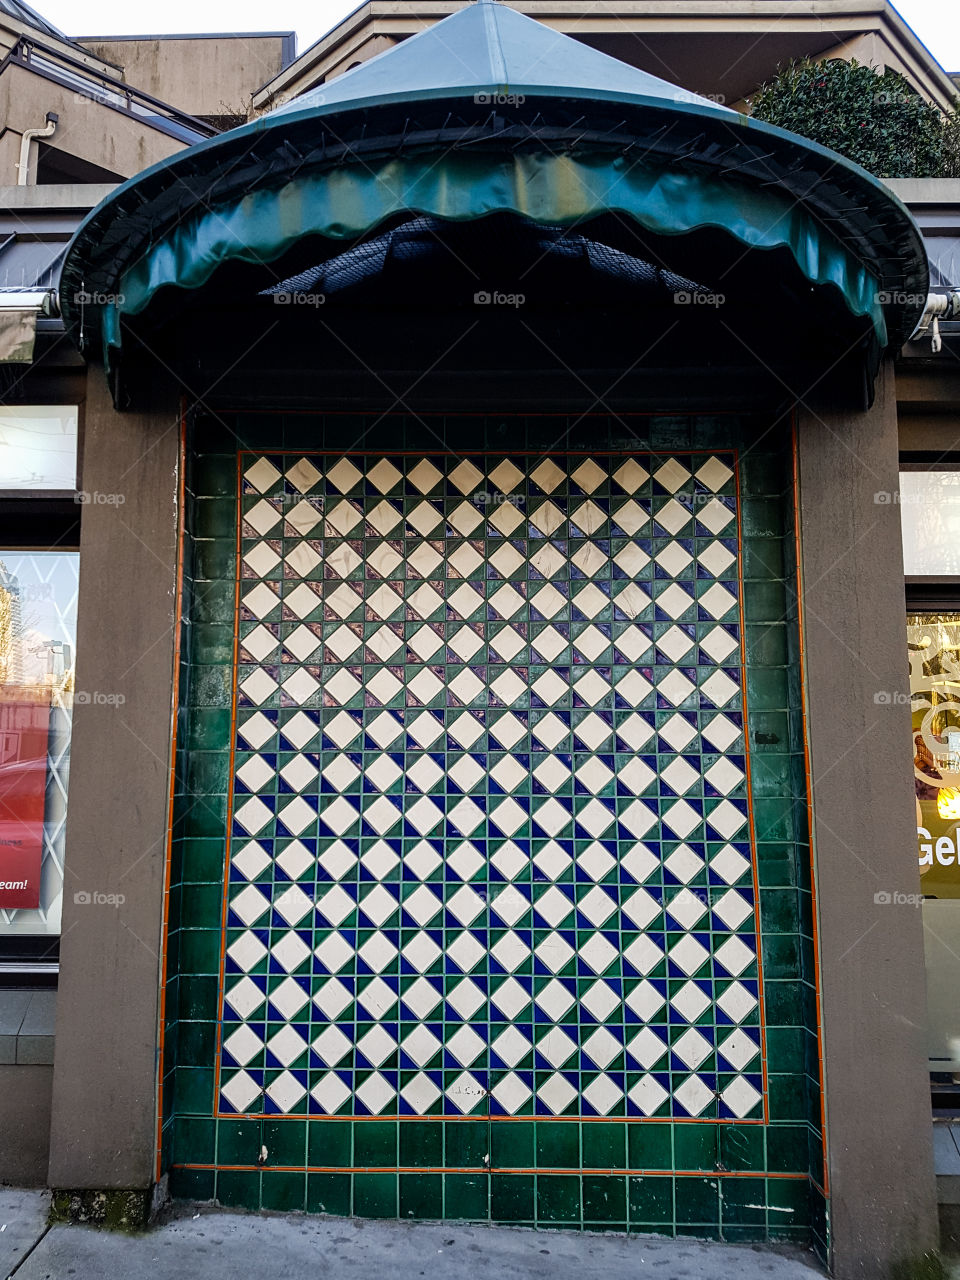 tiled pattern wall